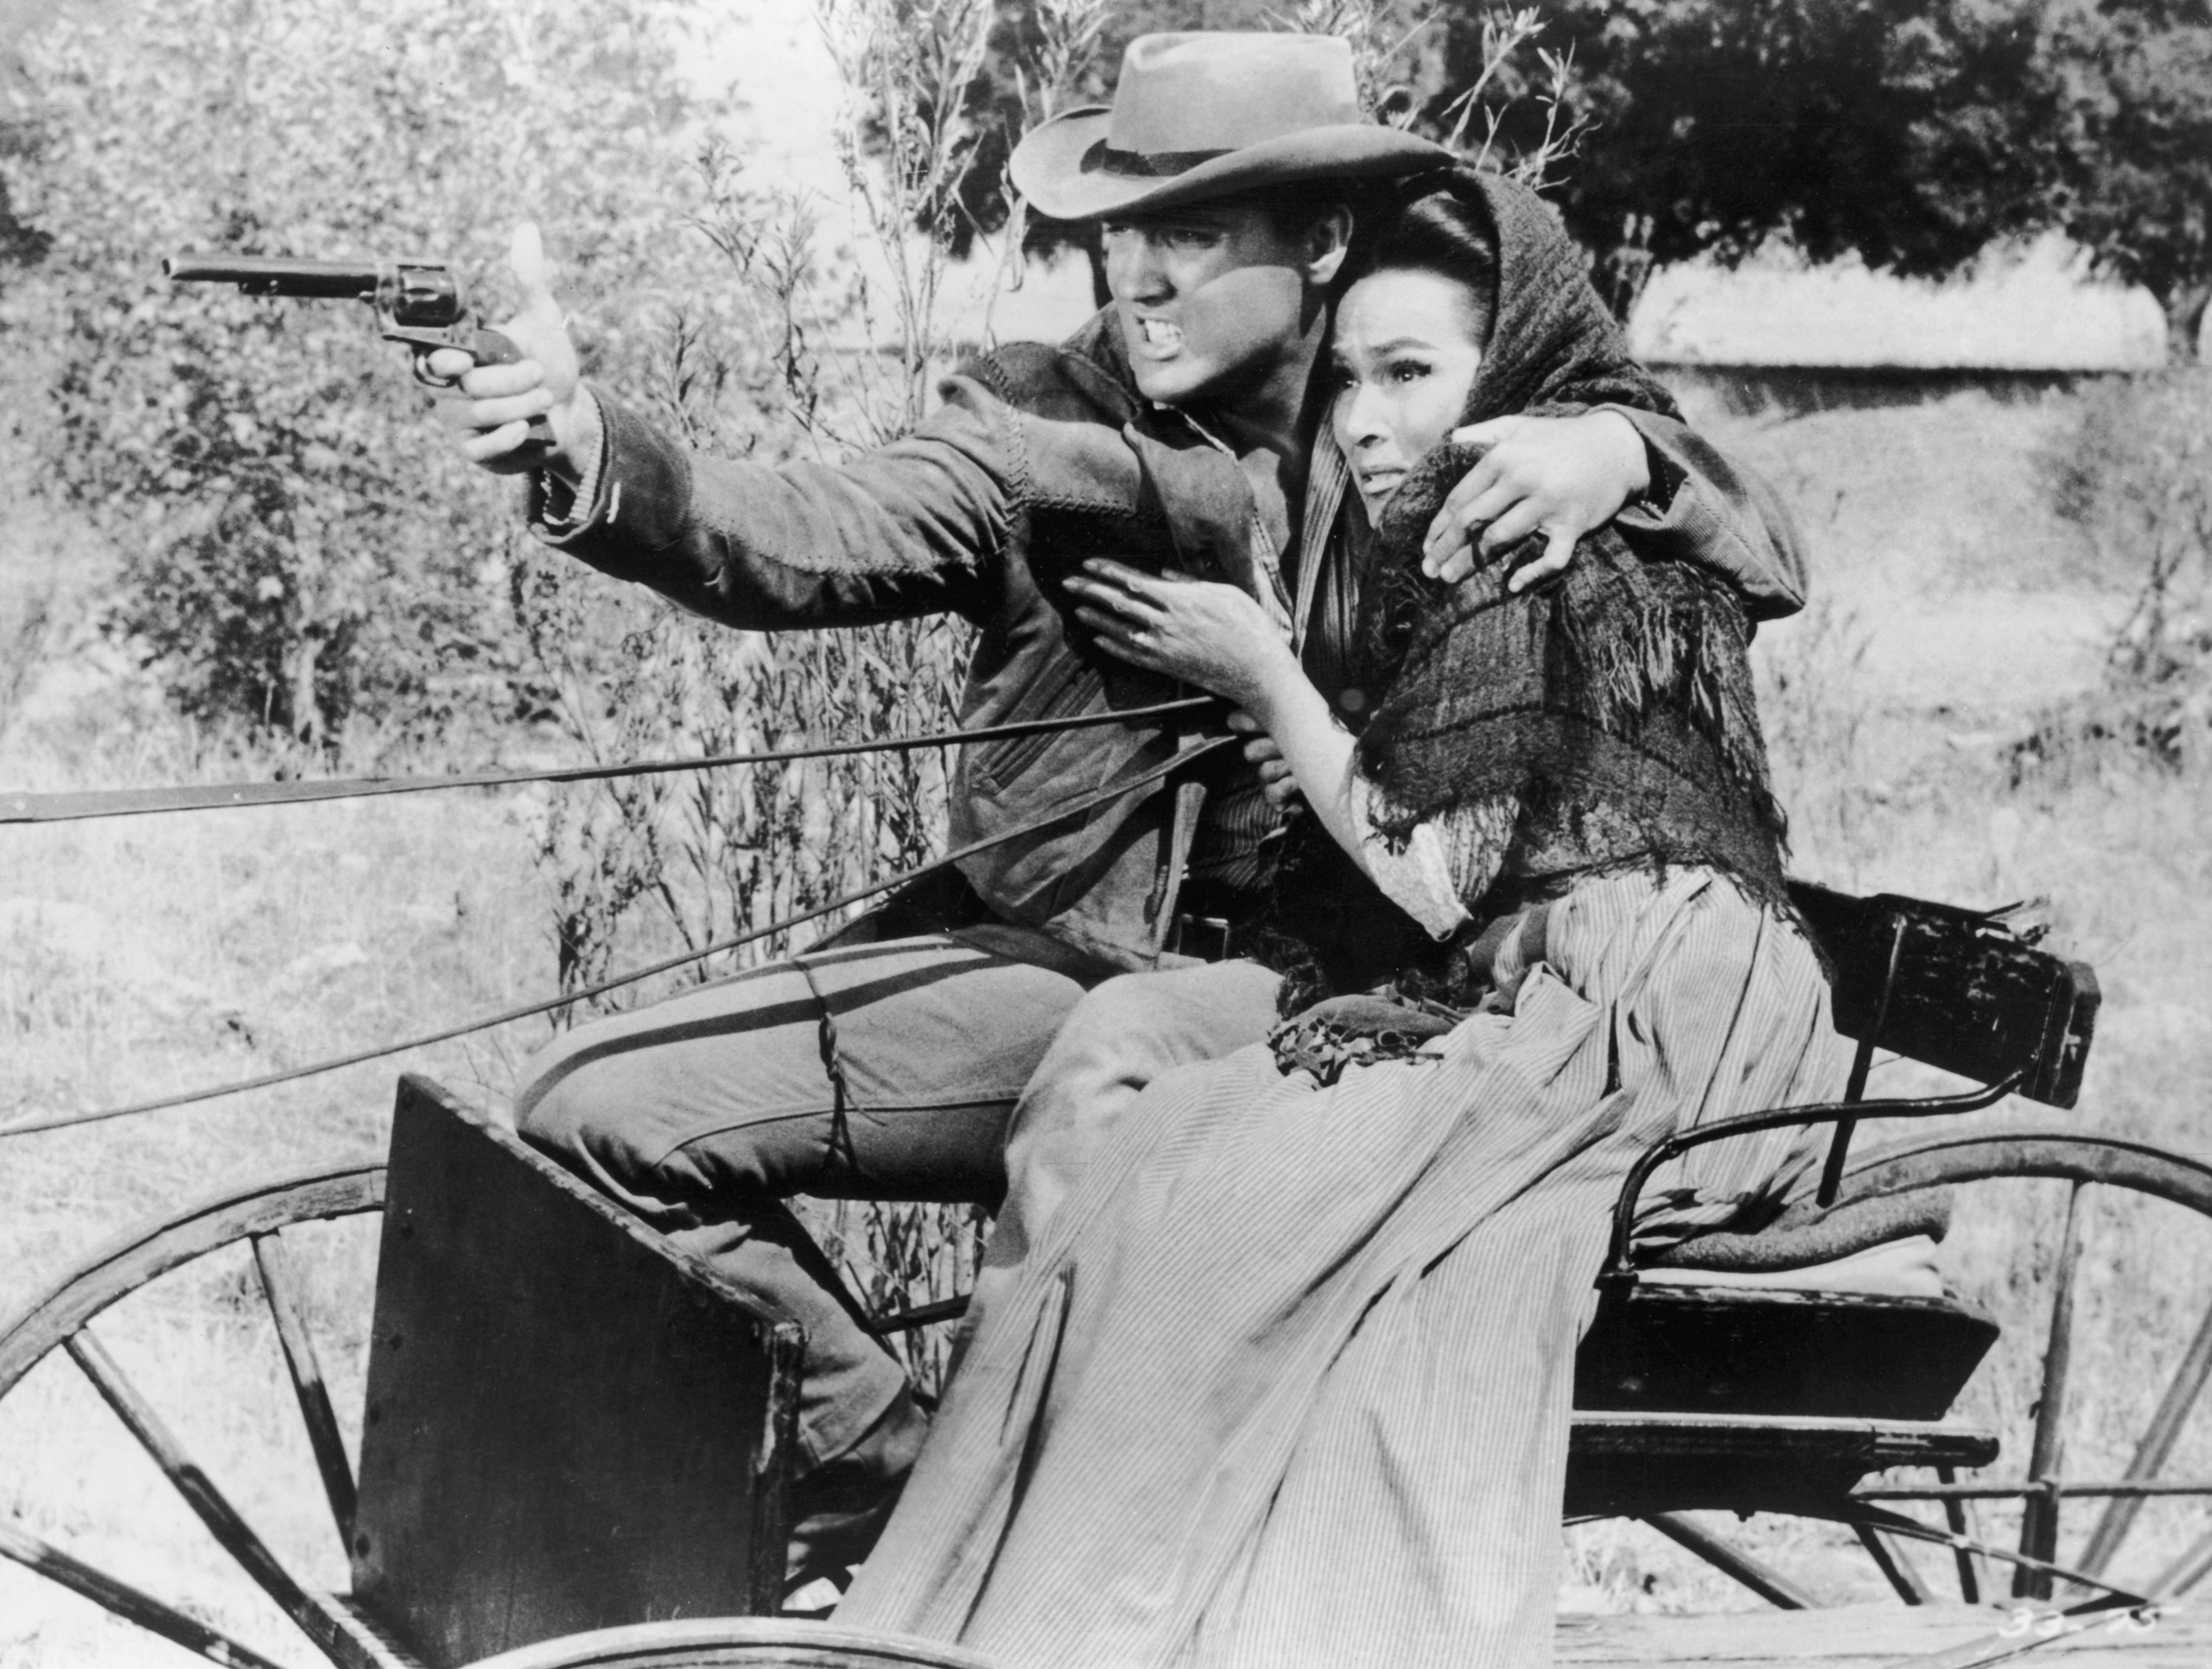 Elvis Presley holding a woman and a gun